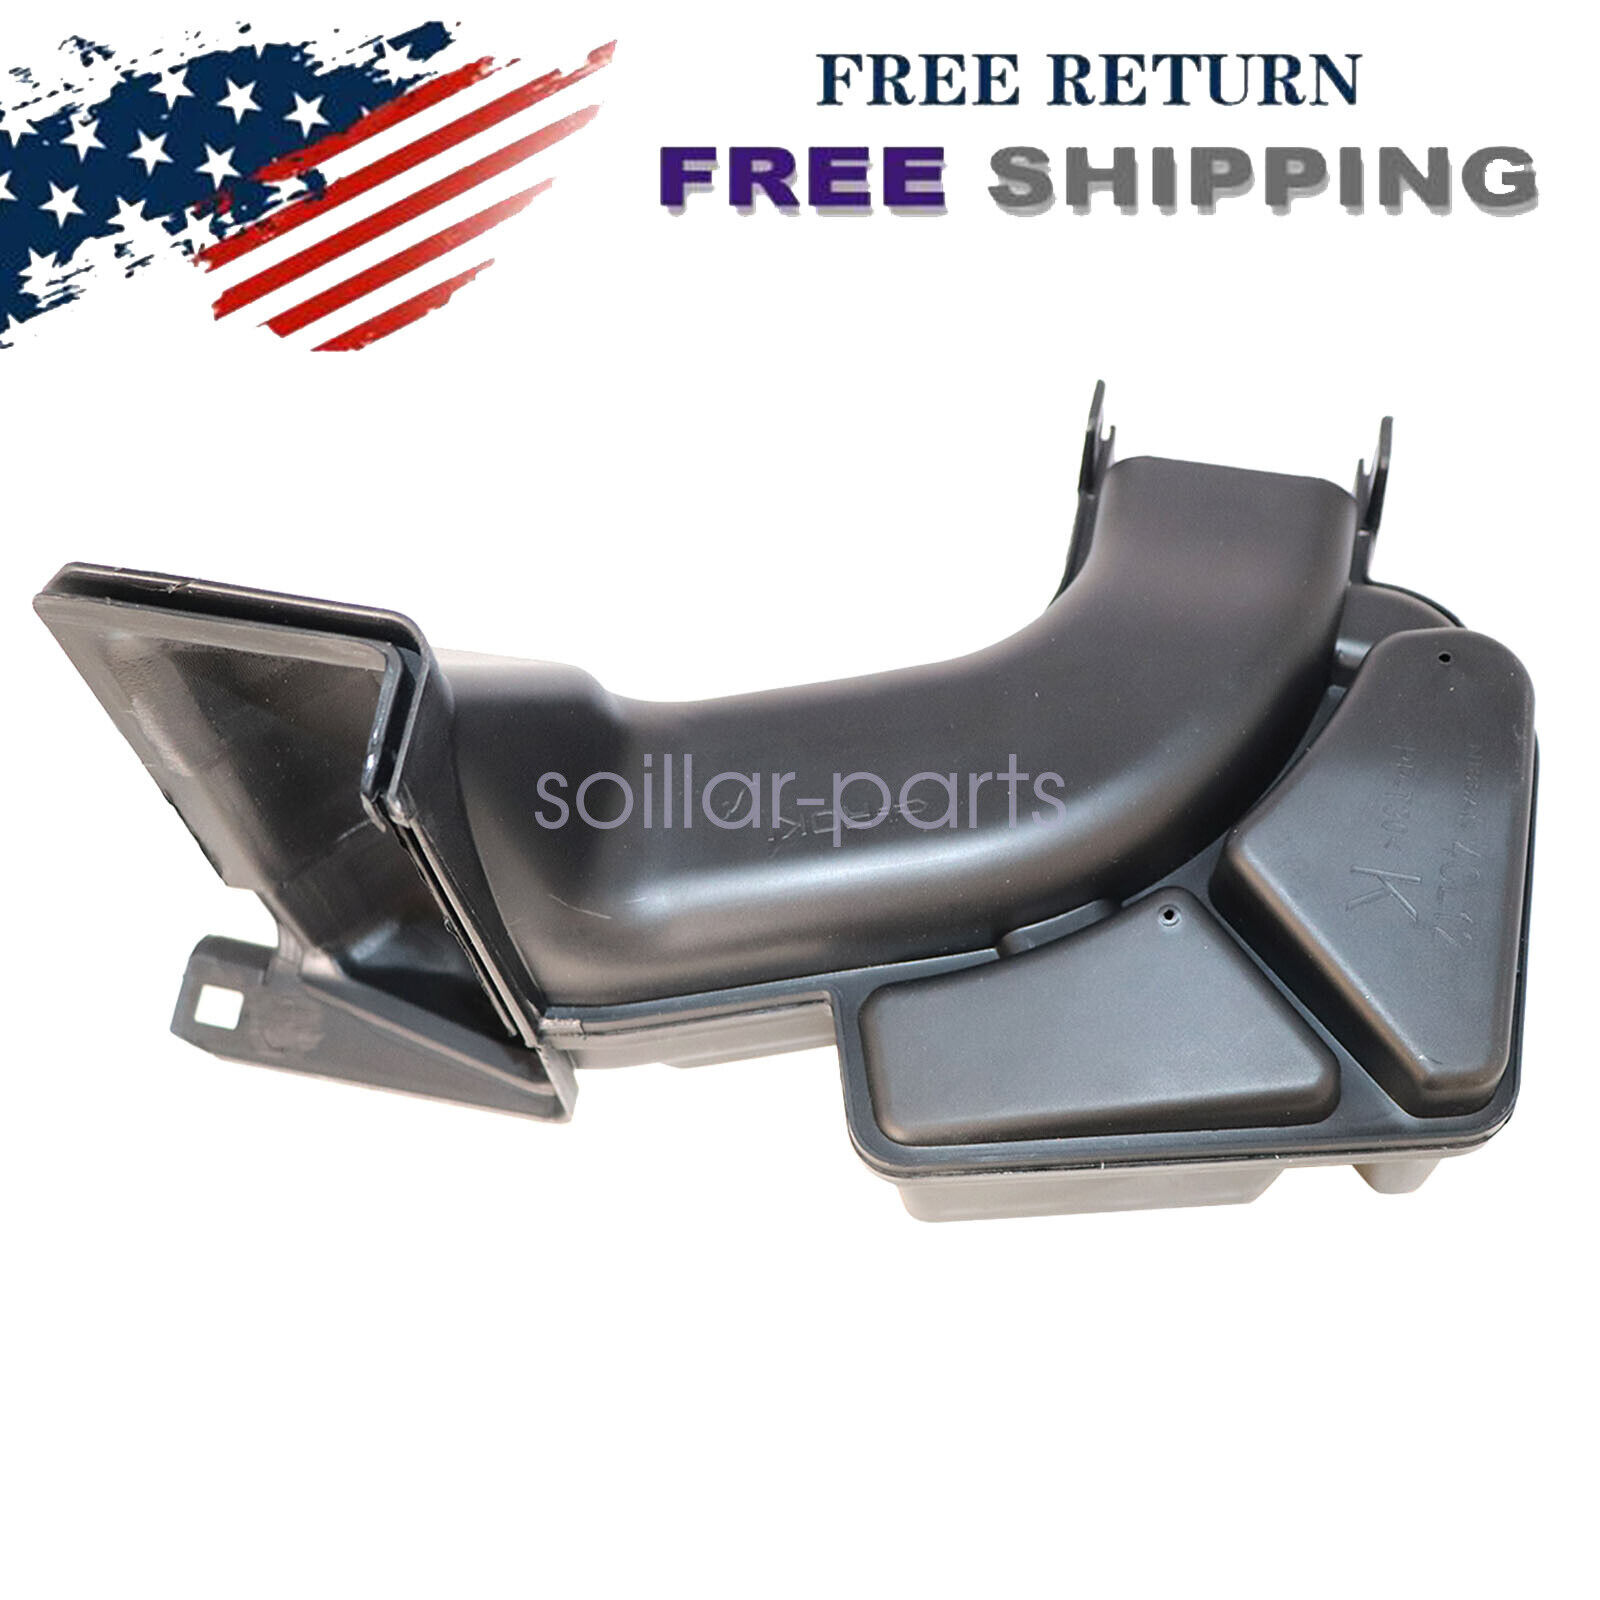 1x Air Intake Duct Replacement For 2014 2015-2020 Nissan Rogue 2.5L L4